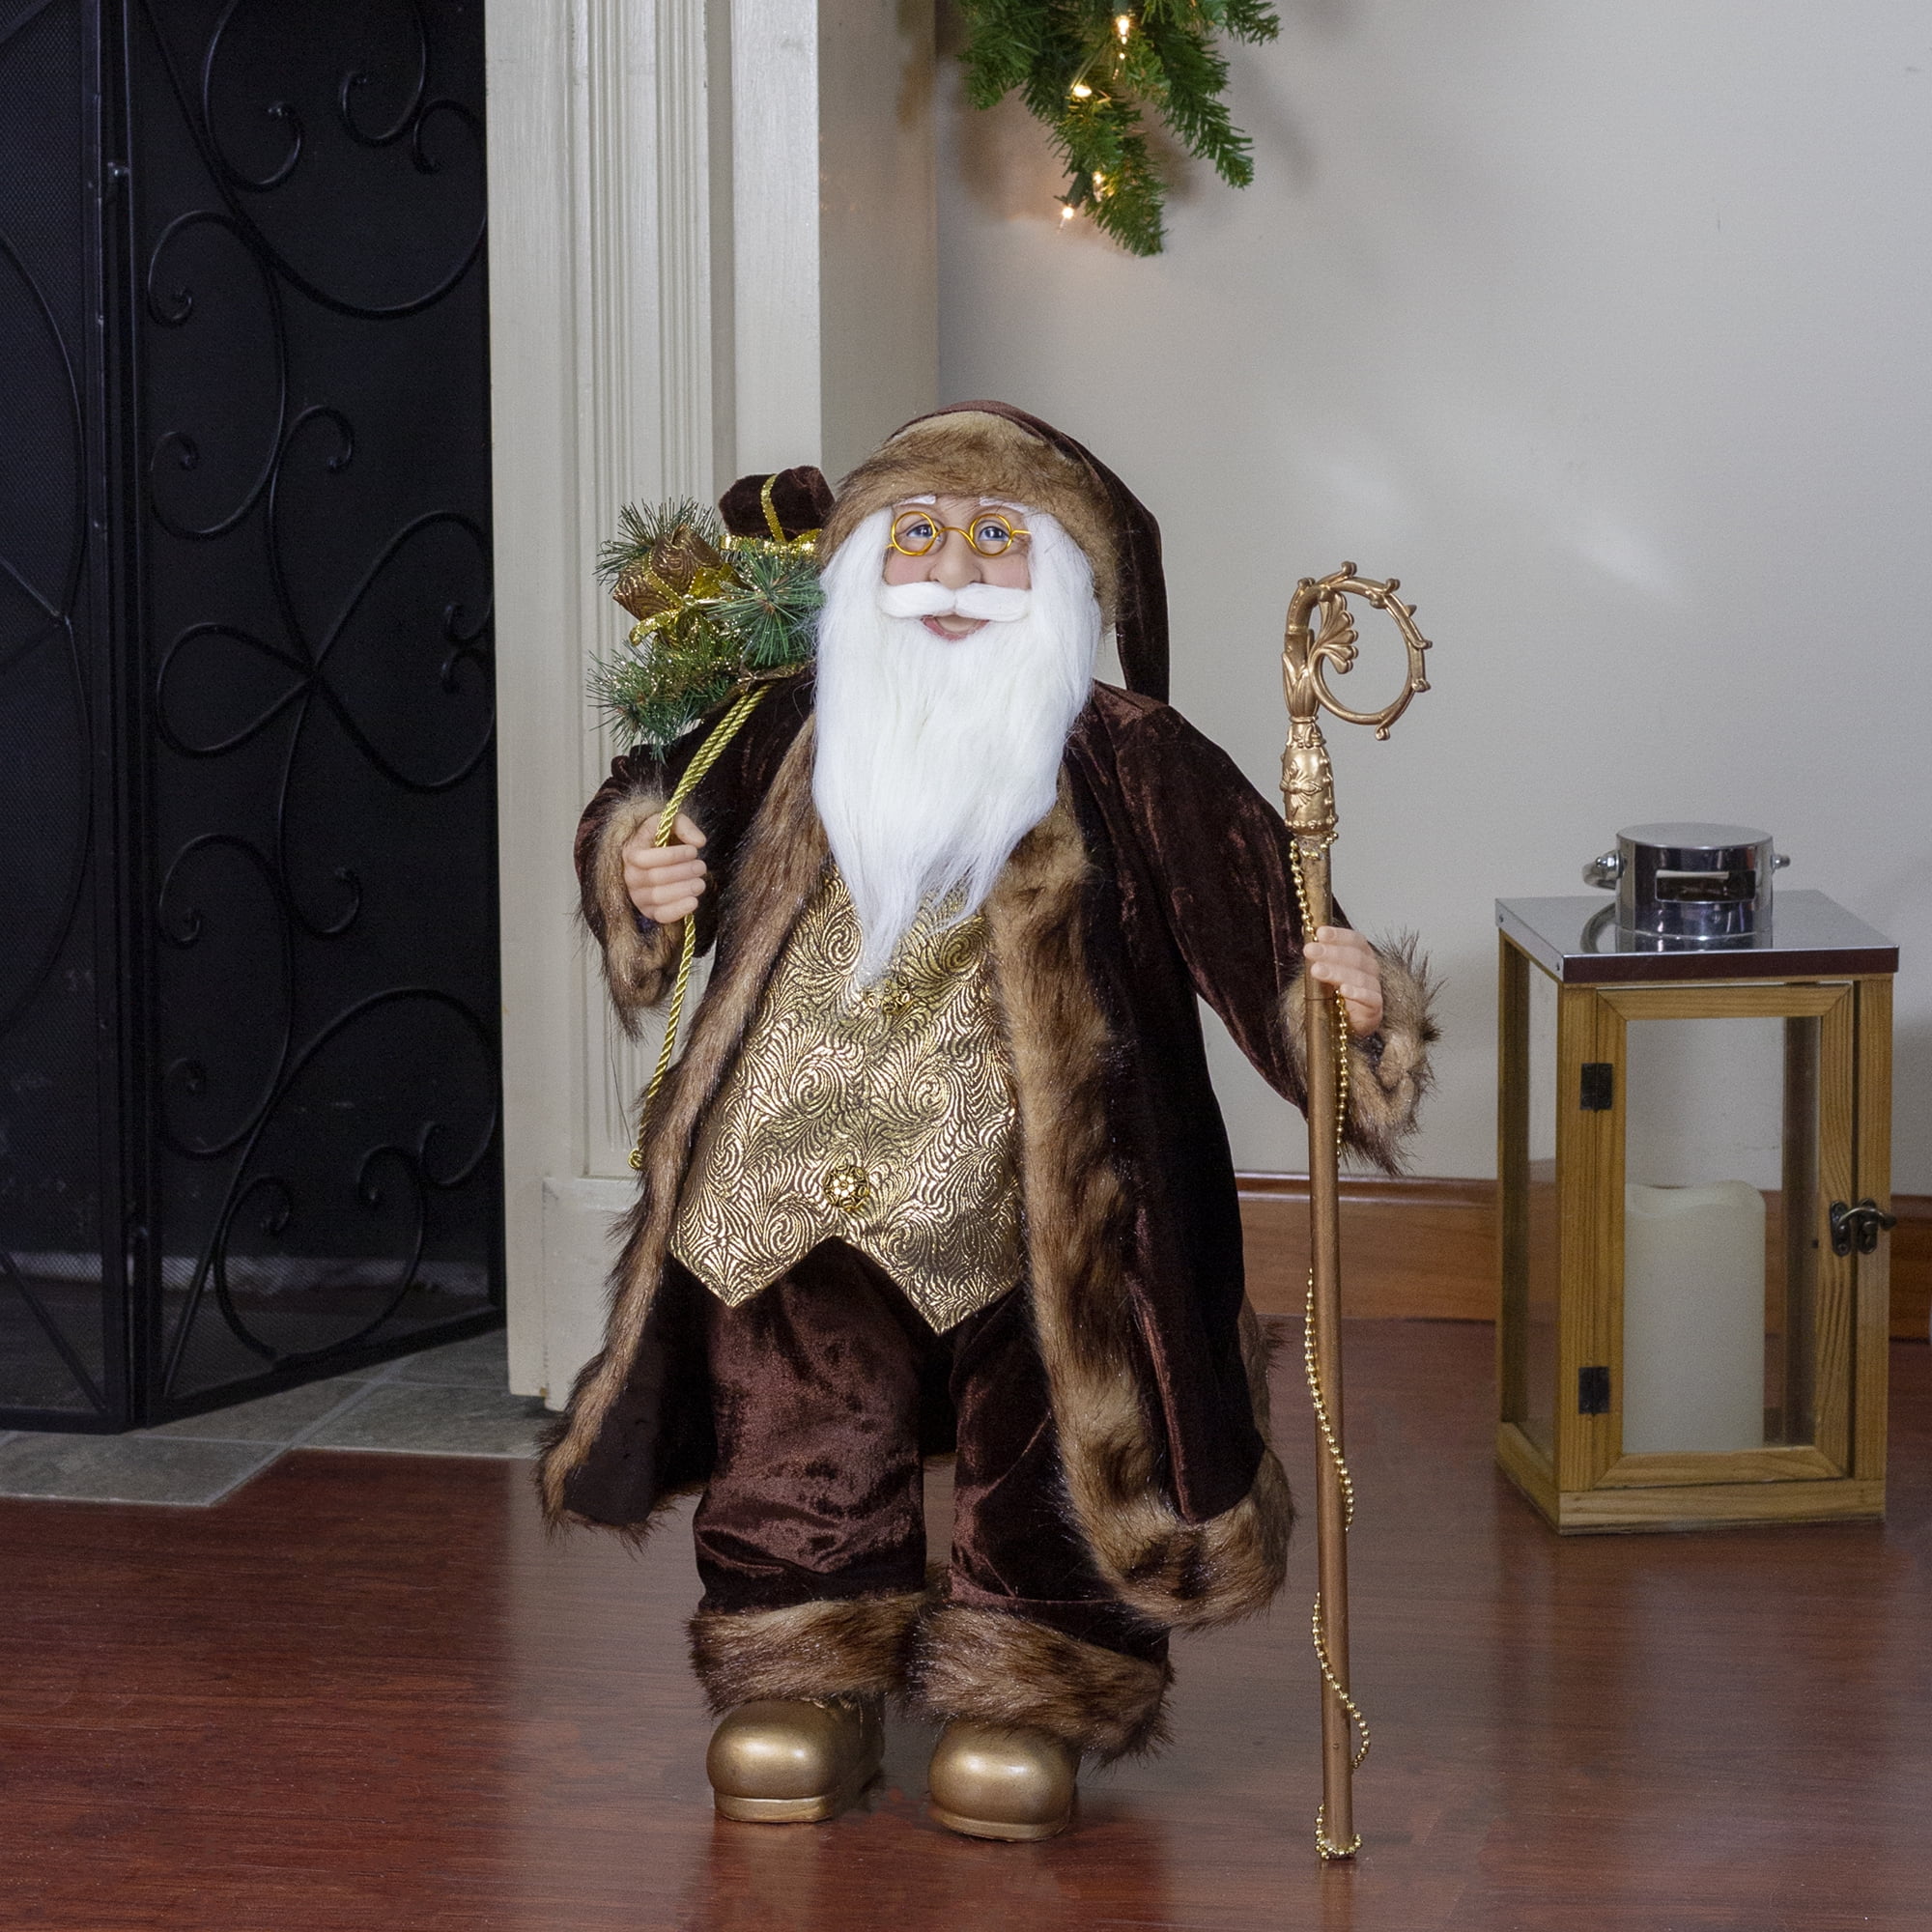 Northlight Standing Santa Claus Christmas Figure with Staff Brown/Bronze 24